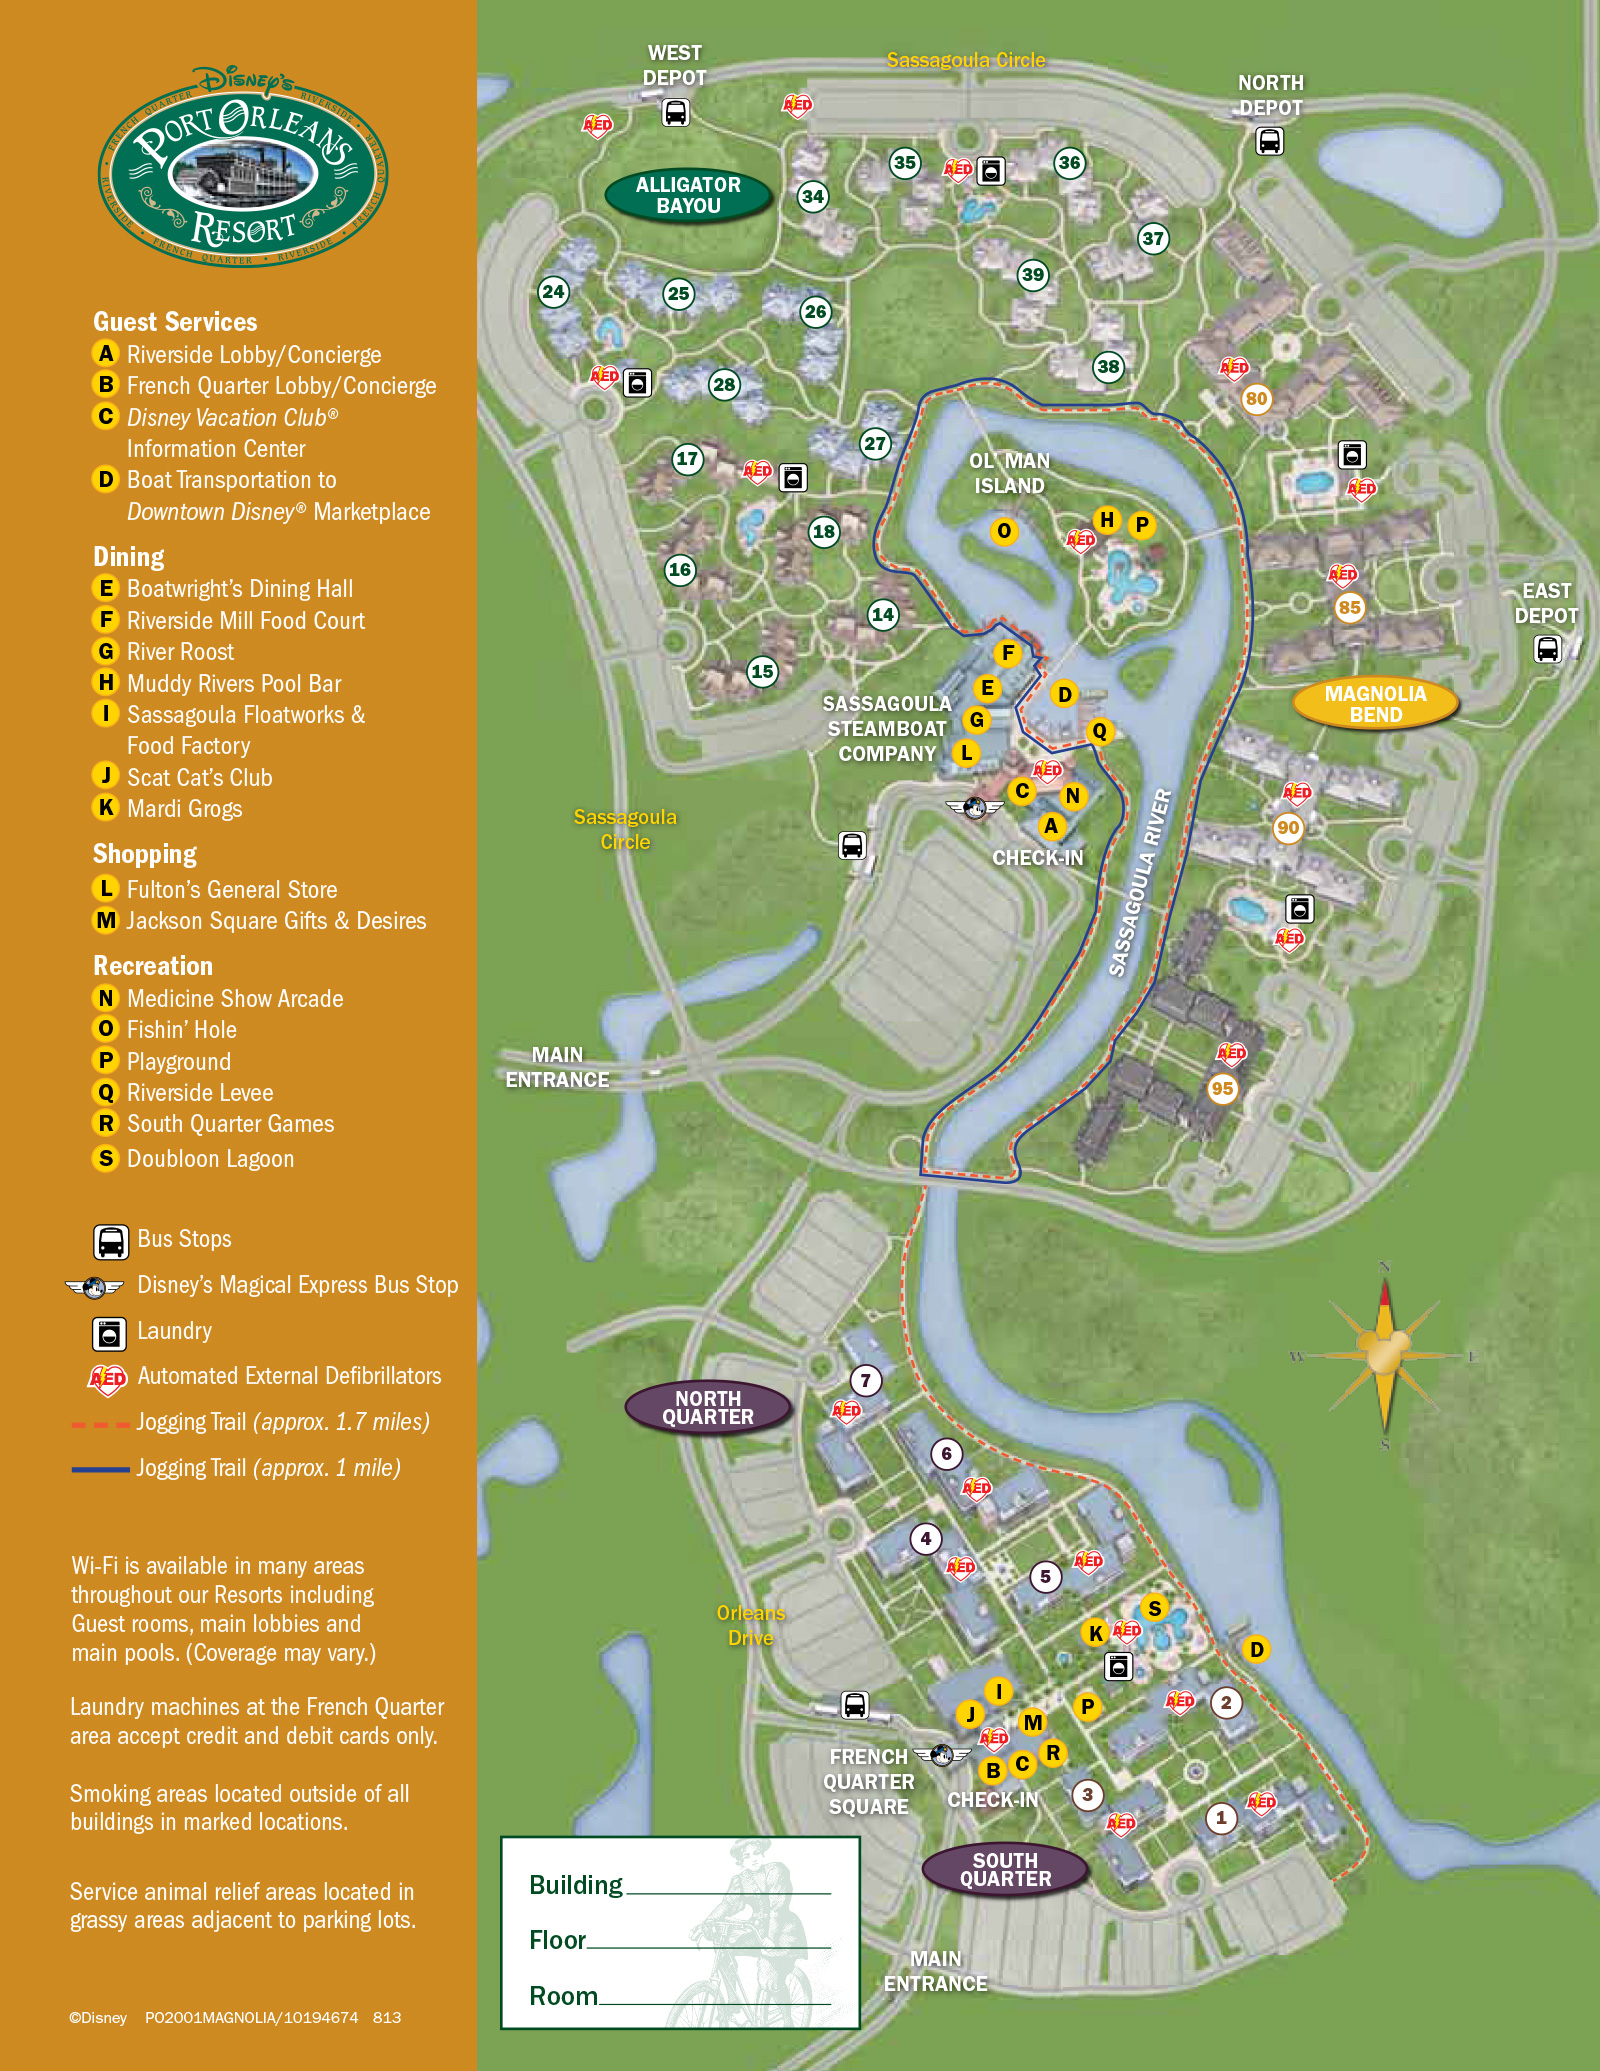 2013 Port Orleans Riverside guide map Photo 3 of 4